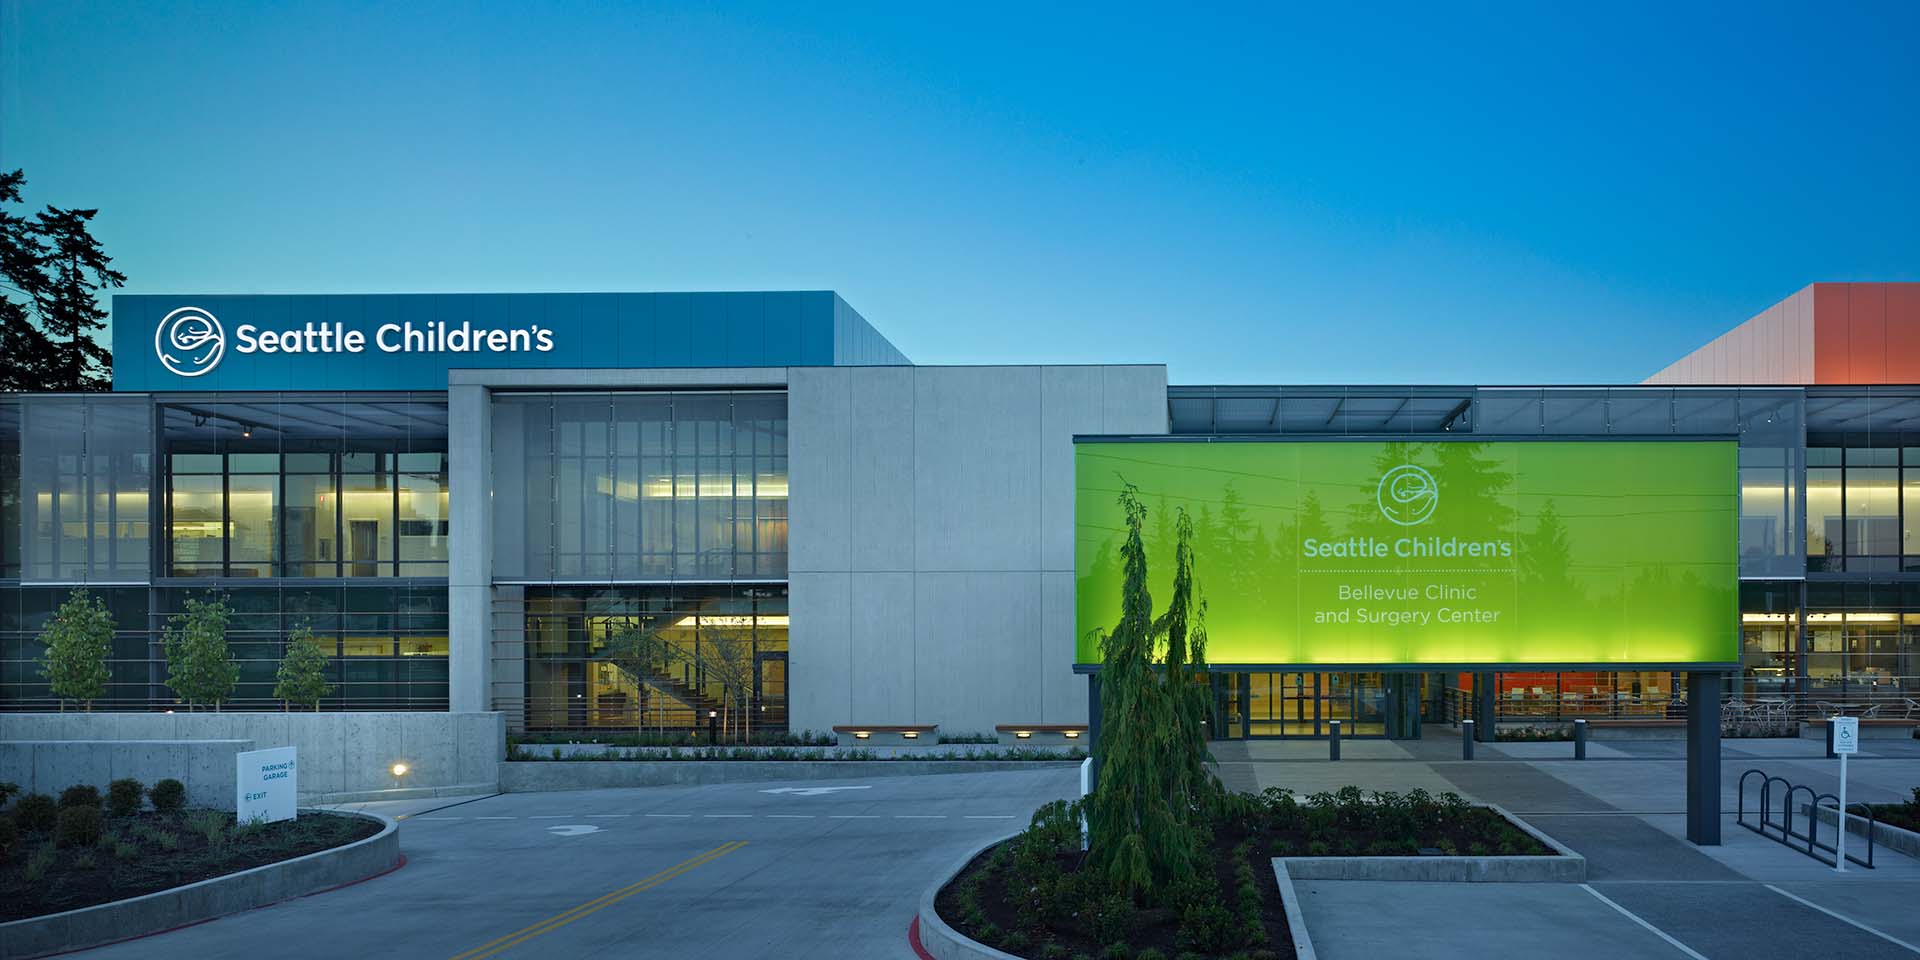 Seattle Children's Bellevue Clinic and Surgery Center, home to Seattle Children's Urgent Care Clinic in Bellevue.